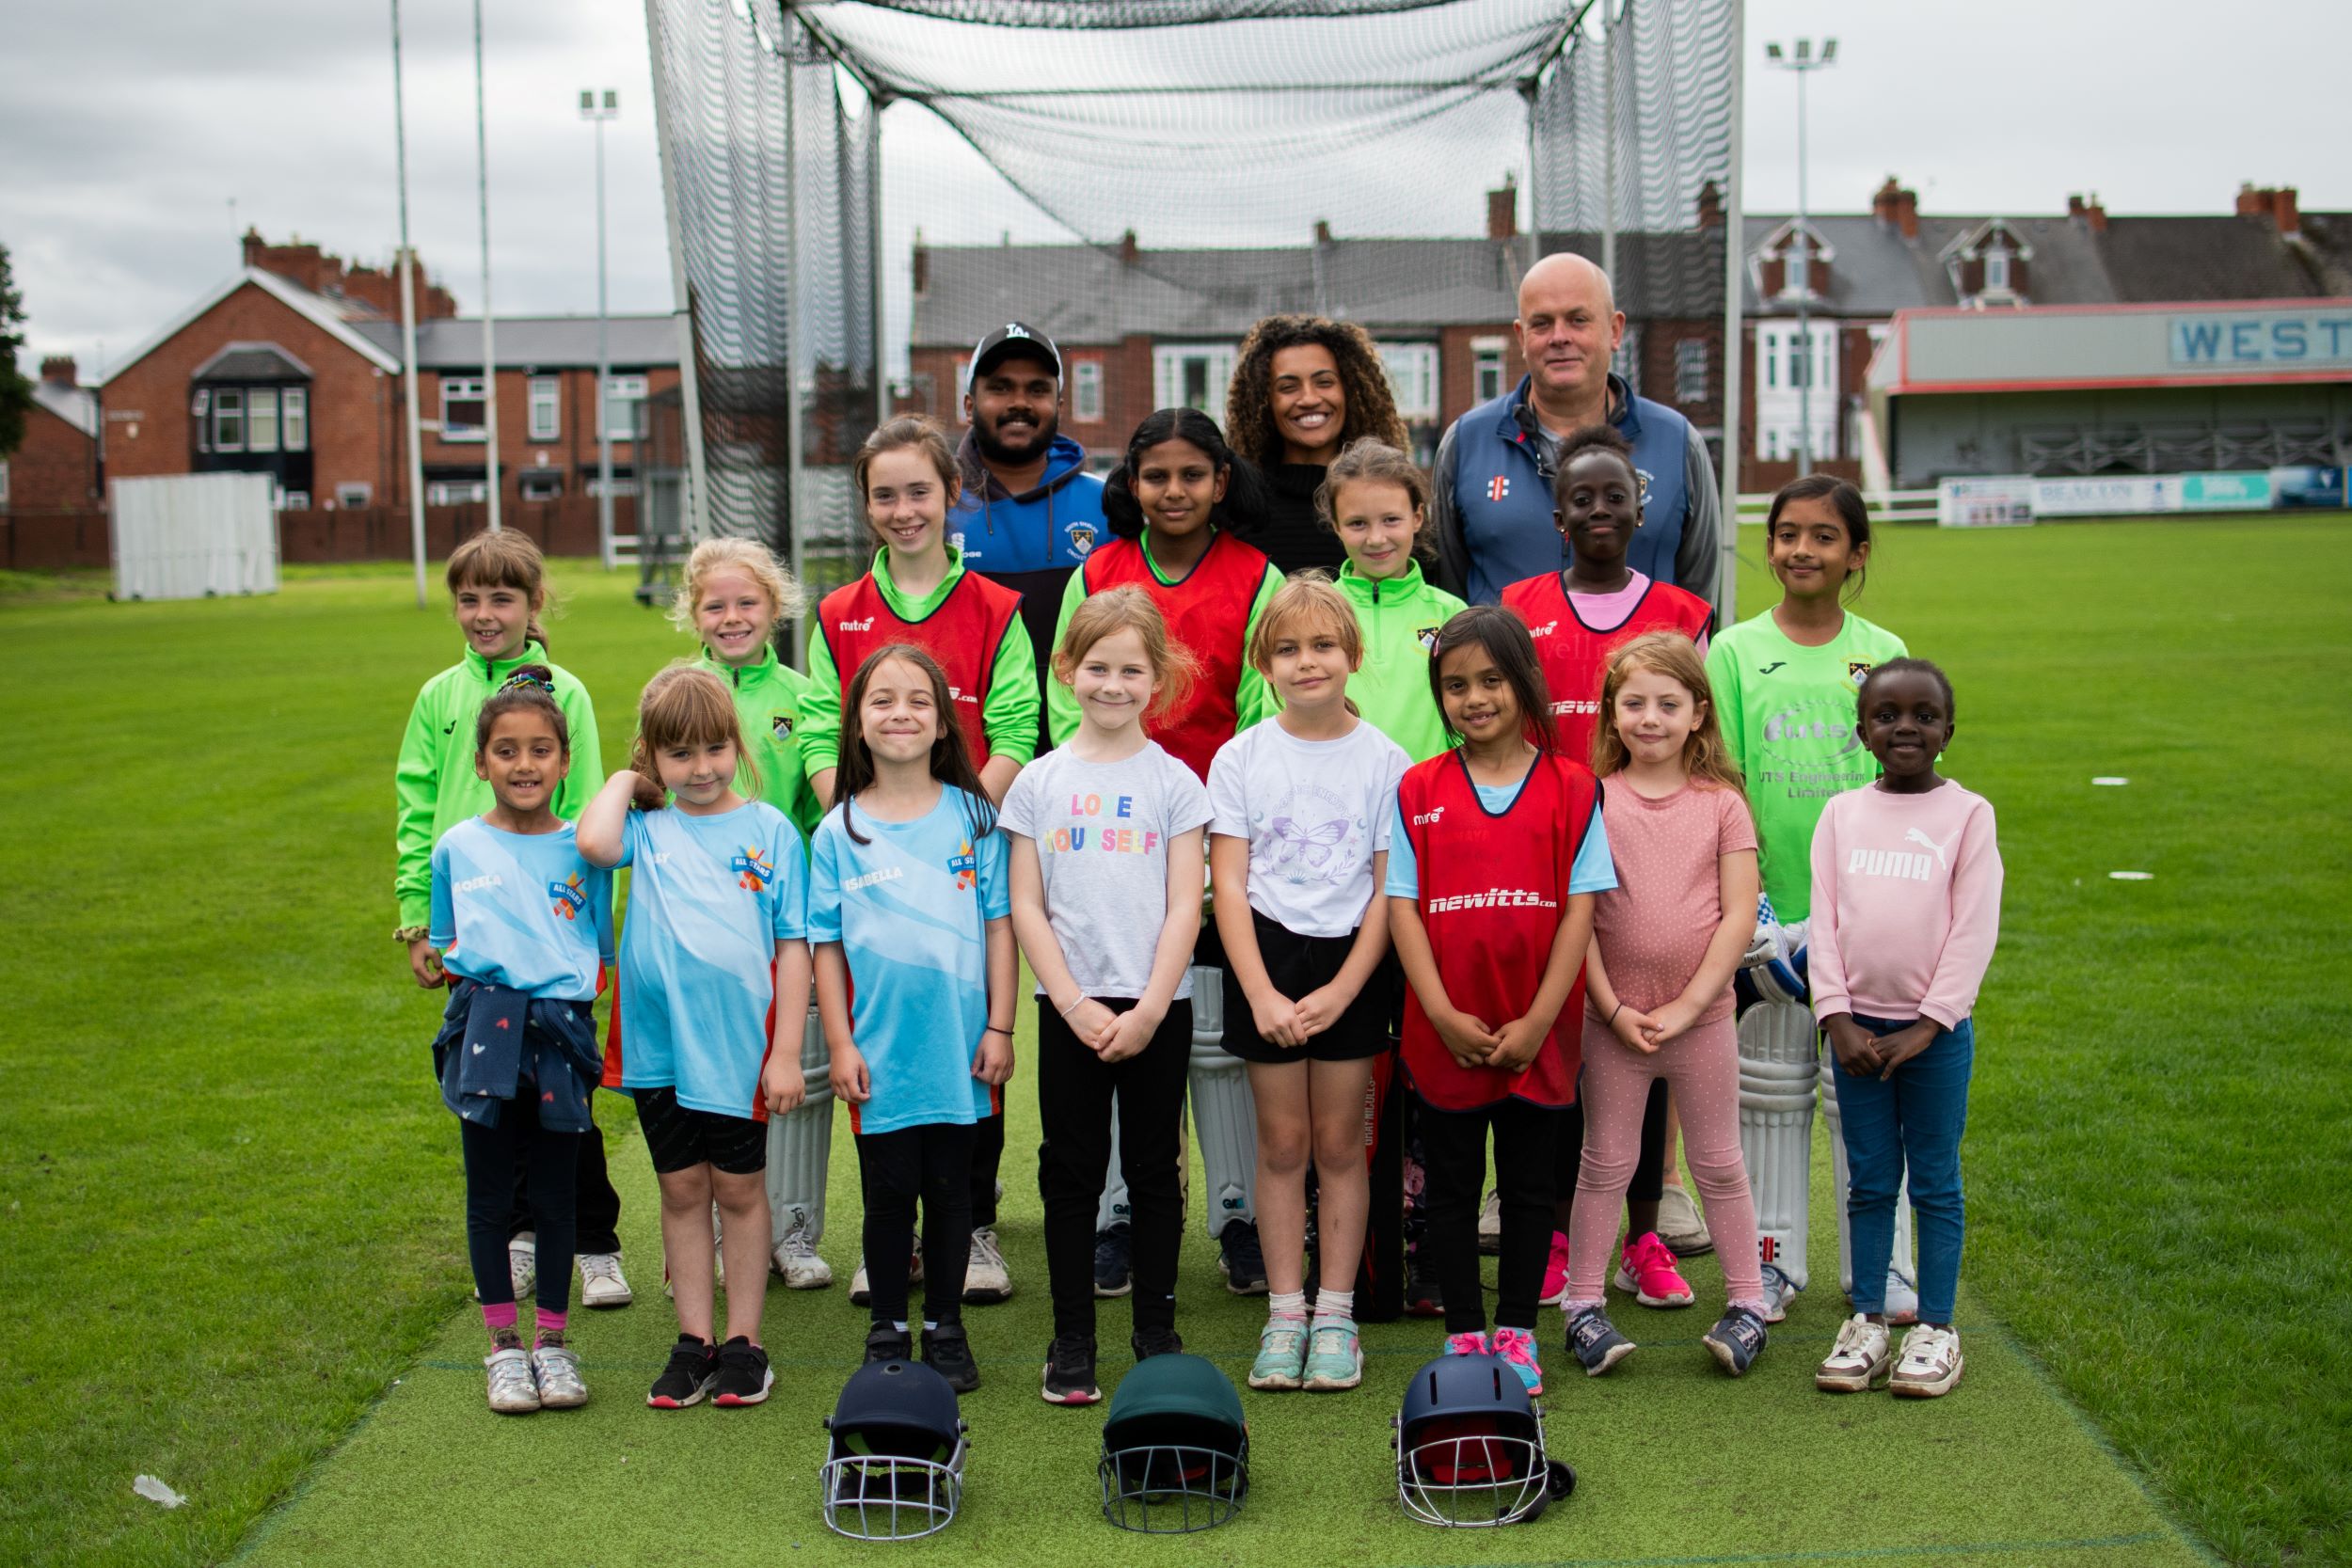 Some of South Shields Cricket Club's young players, along with (back, centre) Jamilah Hassan of The Banks Group and (left) Tharusha Fernando and Patrick William-Powlett of South Shields Cricket Club